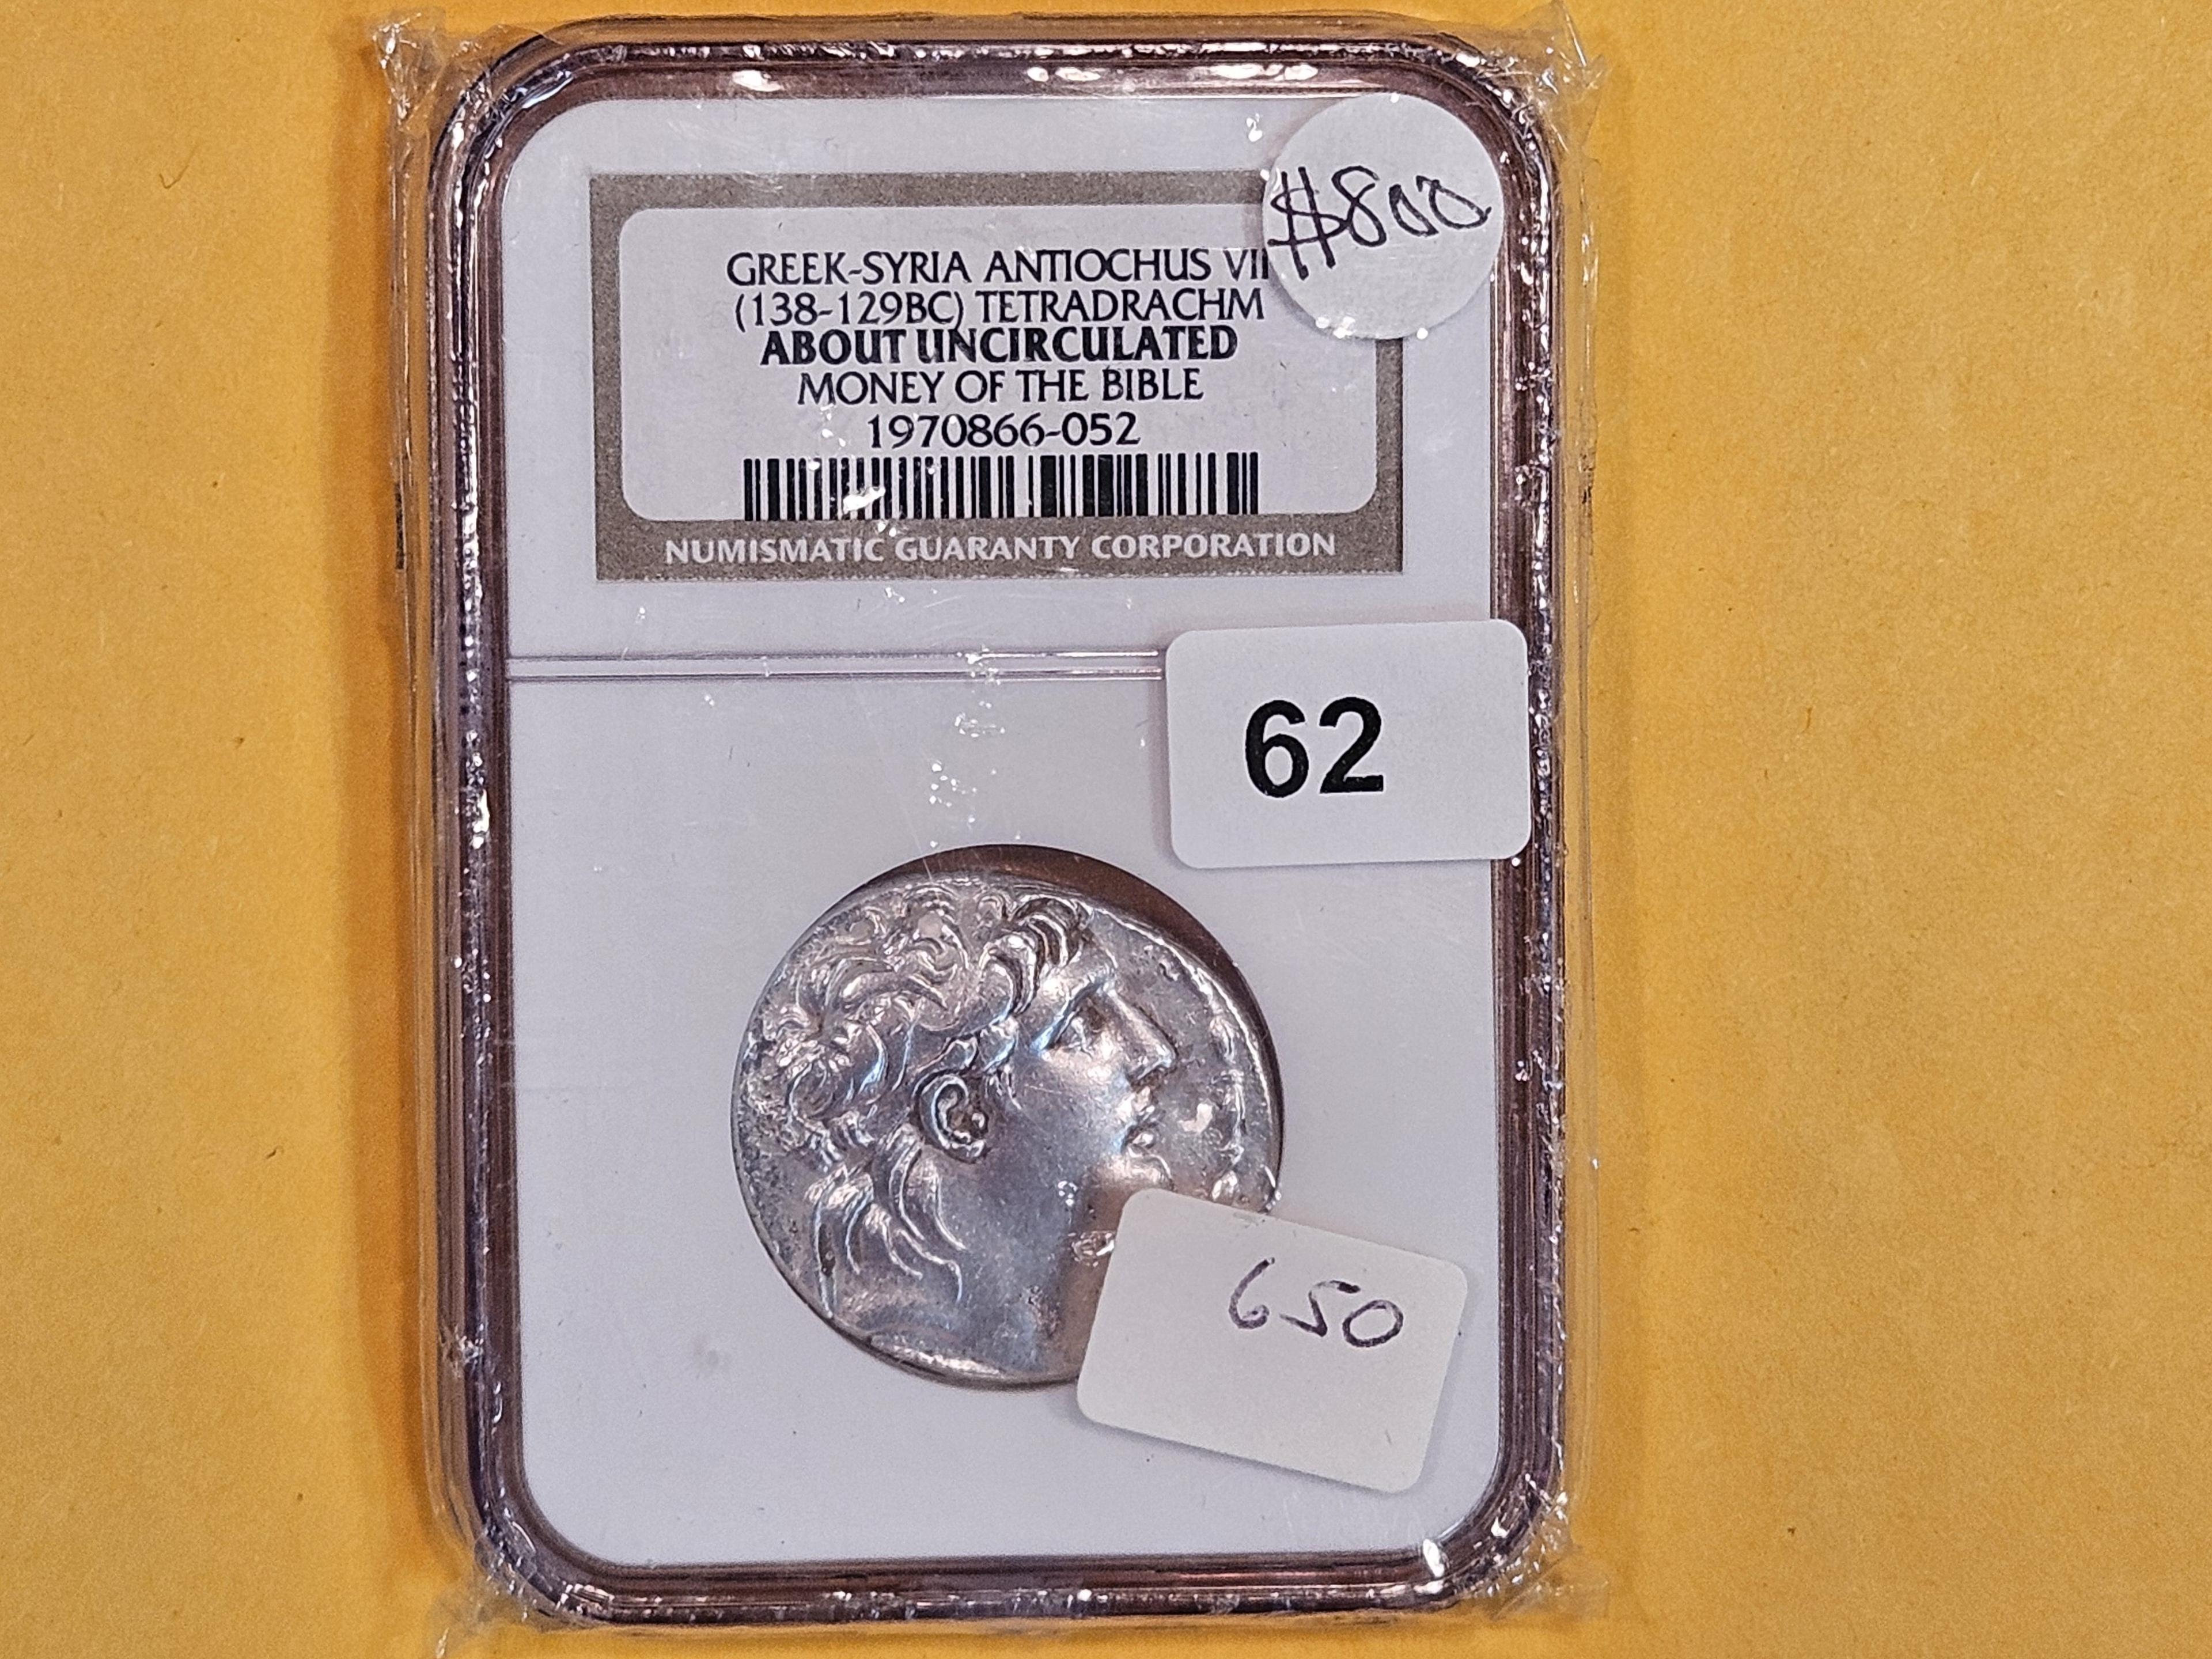 * ANCIENT! NGC GREEK-SYRIA ANTIOCHUS (138-129BC) TETRADRACHM VII in ABOUT UNCIRCULATED!